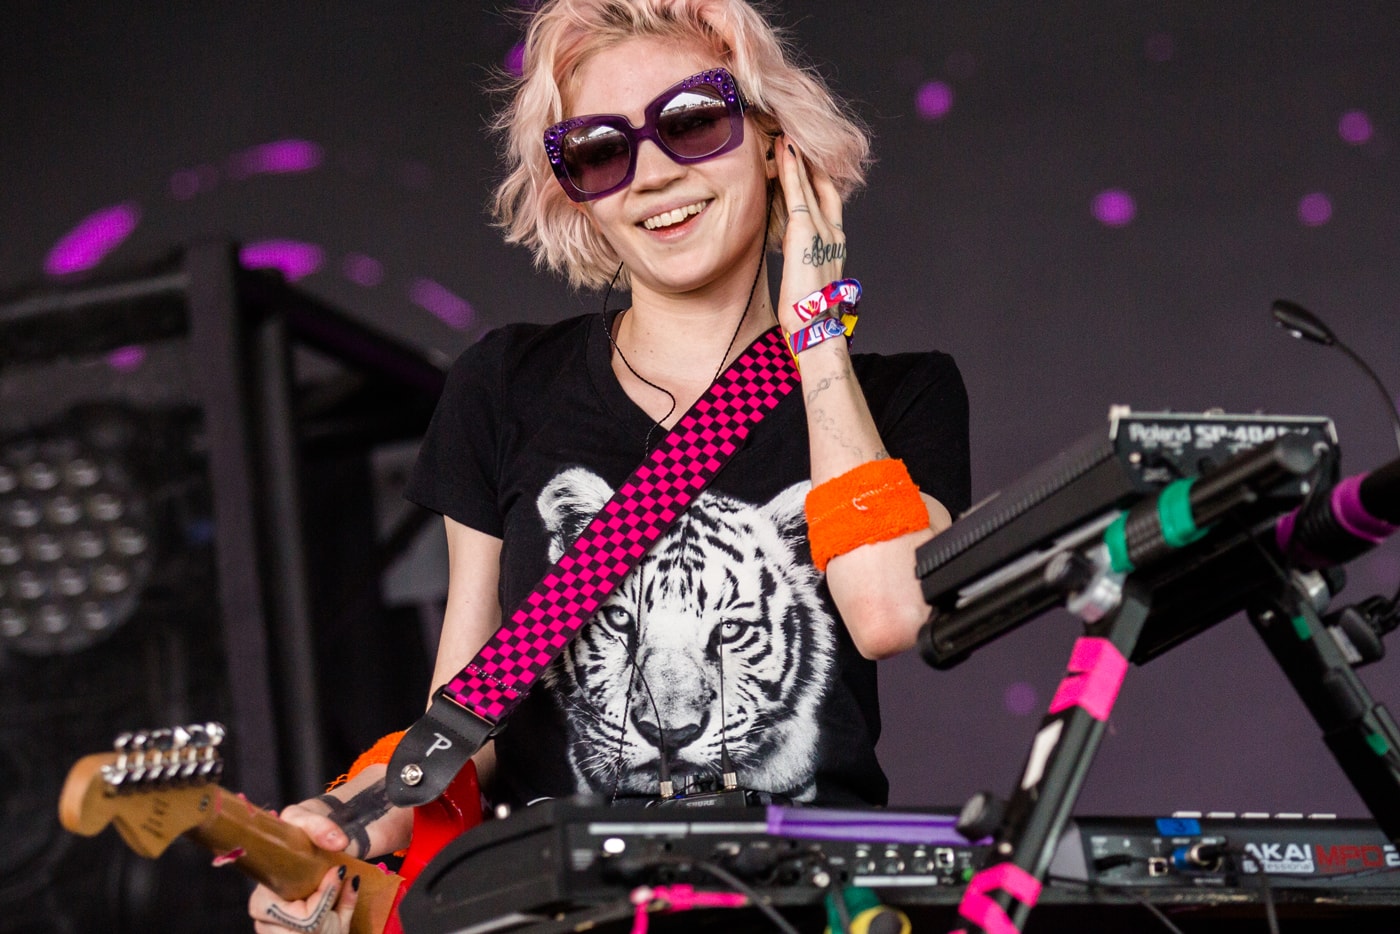 Grimes Covers Franz Schubert's "Ave Maria"